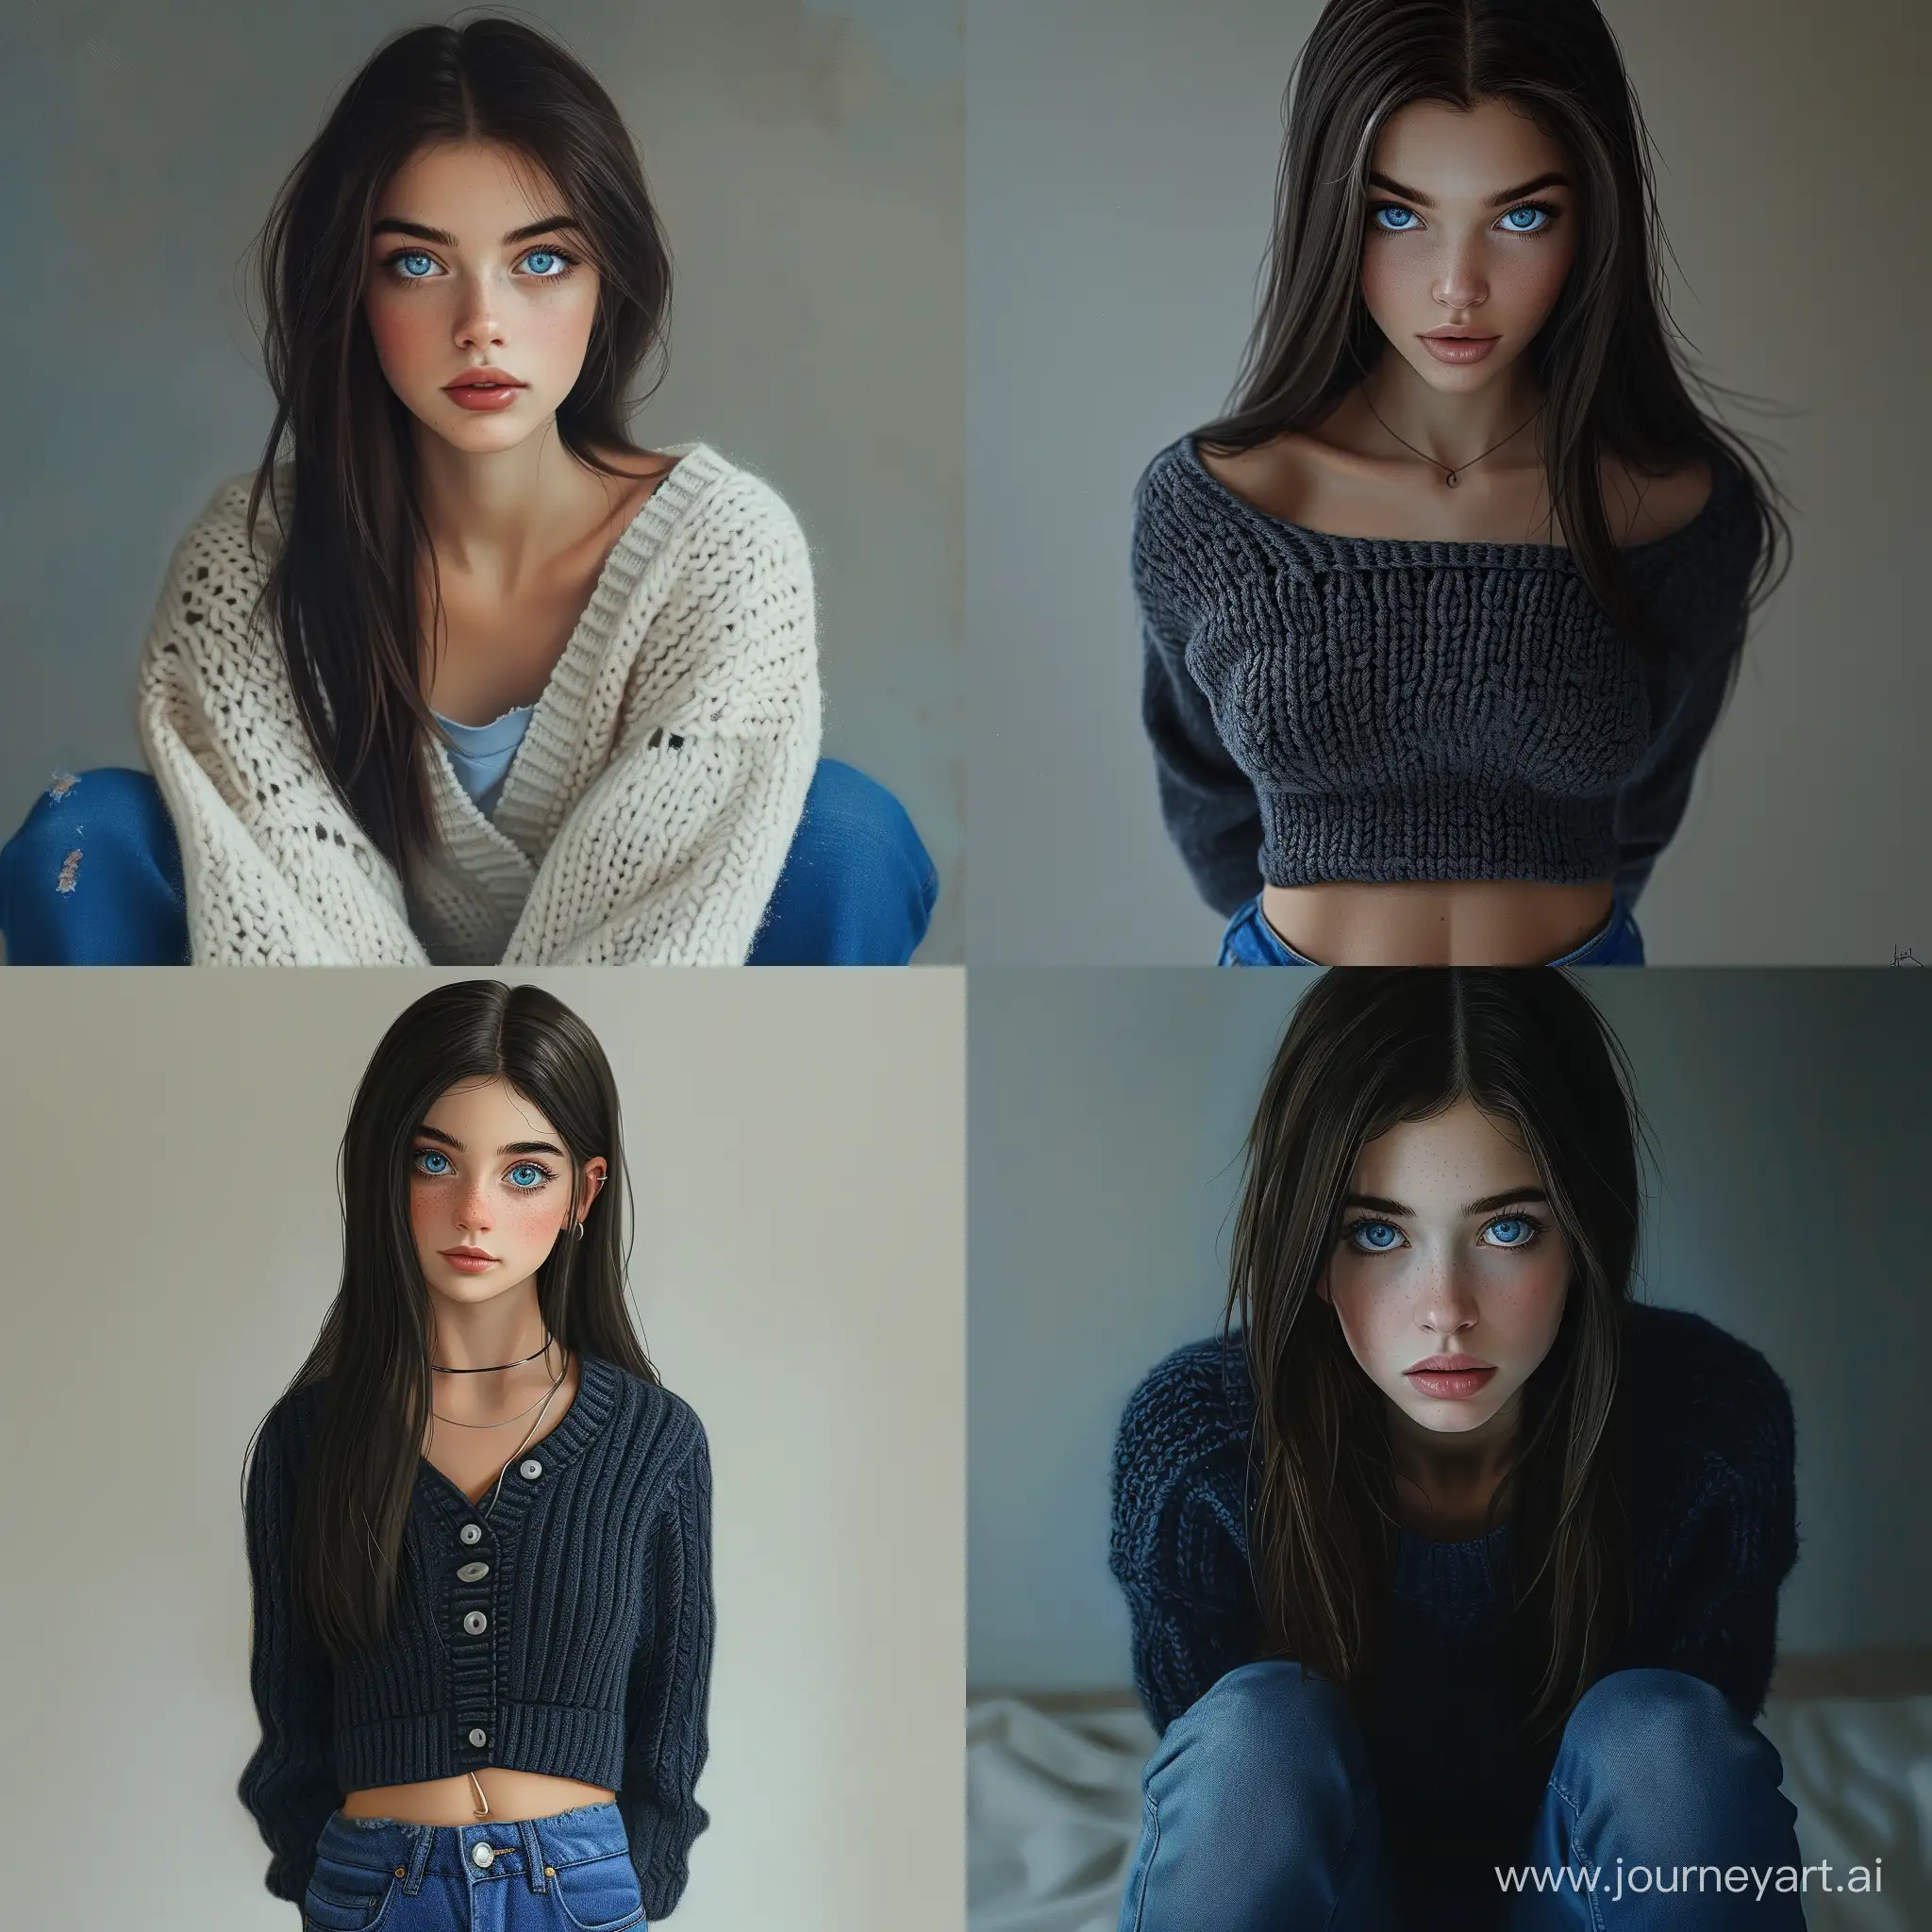 Captivating-Teenage-Girl-with-Dark-Hair-and-Knitted-Cardigan